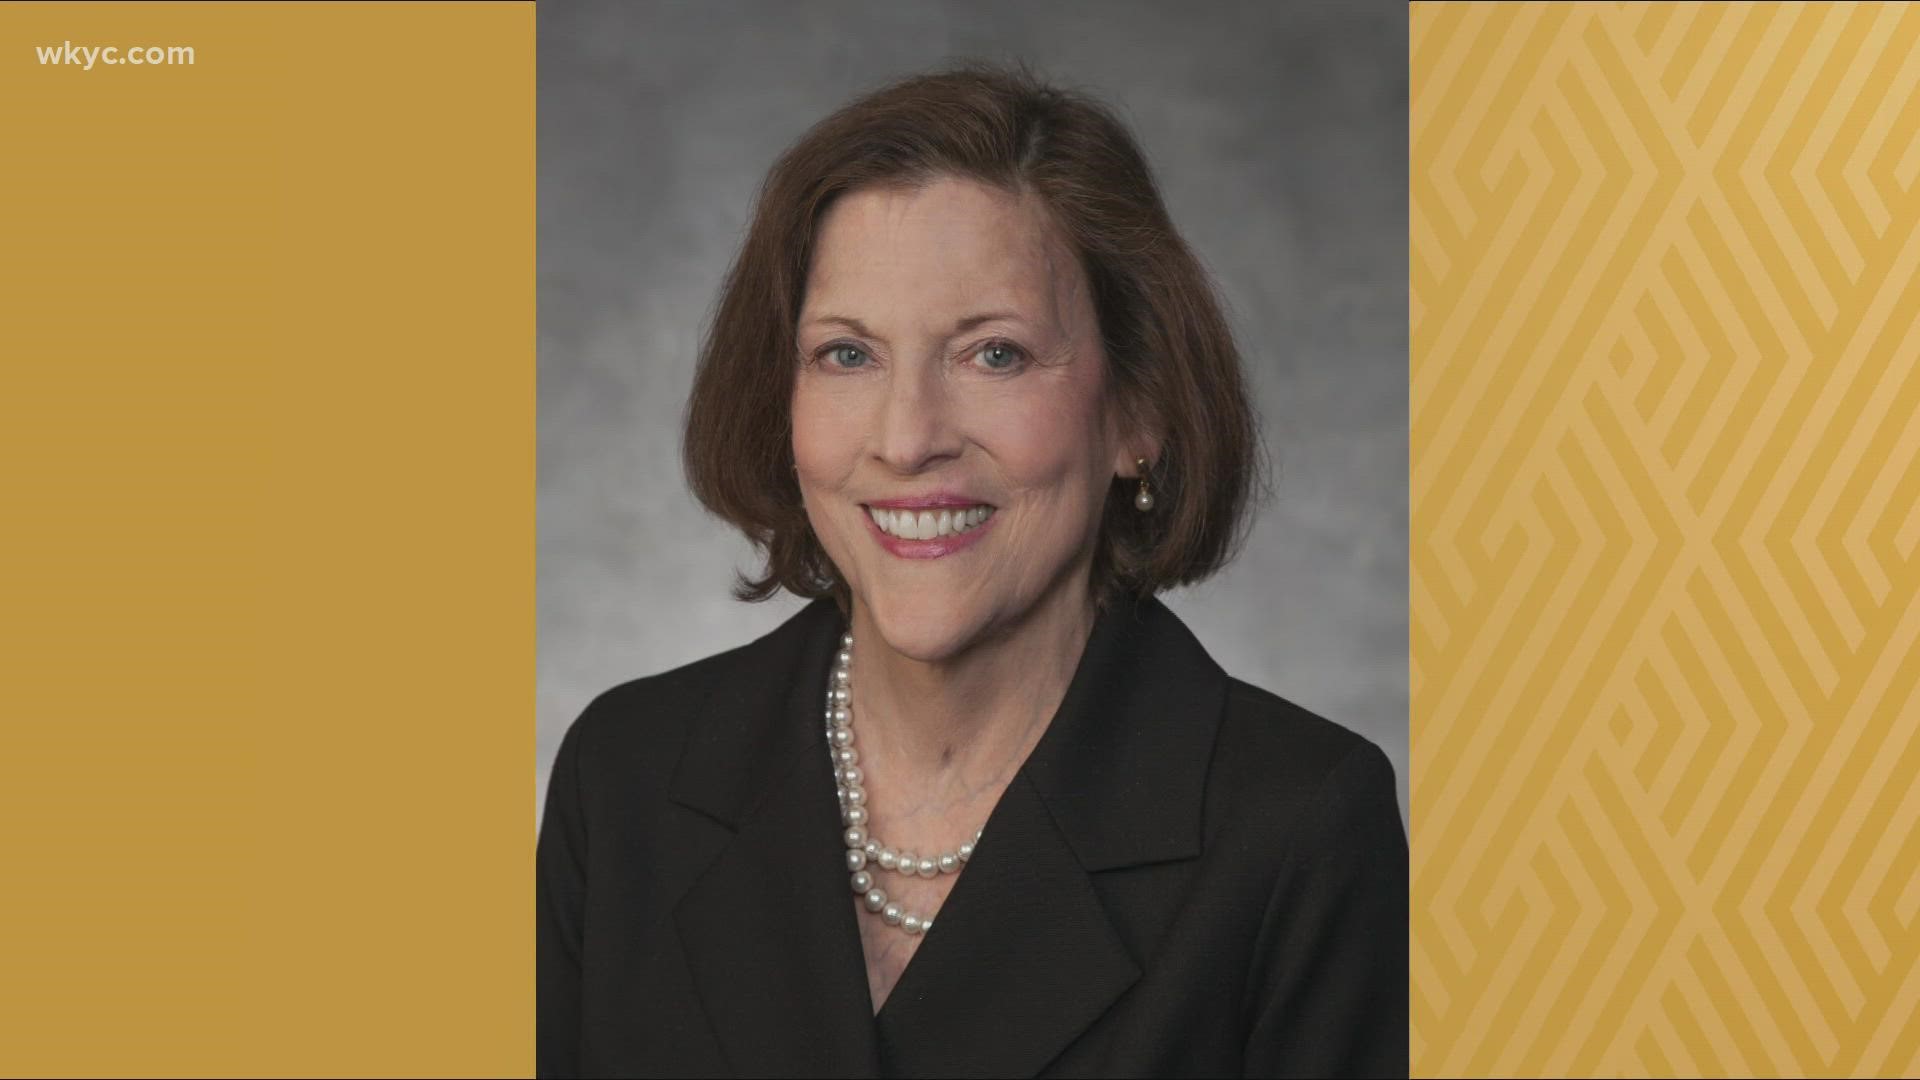 Judge McDonnell was regarded as a legal trailblazer, serving as Cuyahoga County Court's first female Administrative and Presiding Judge from 2006-2009.